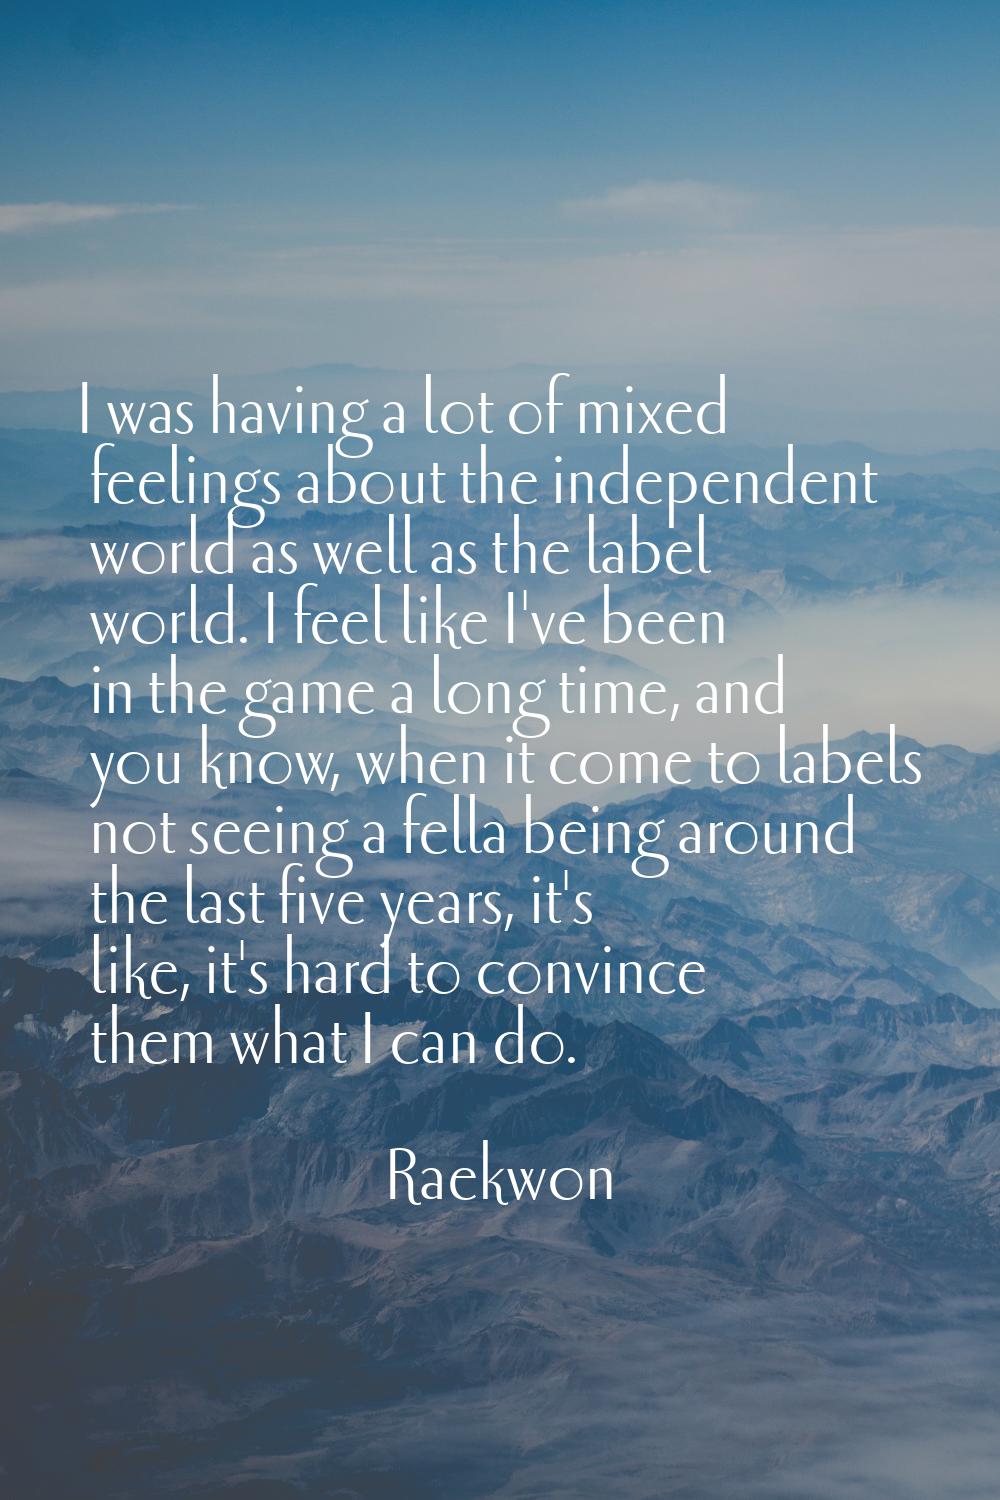 I was having a lot of mixed feelings about the independent world as well as the label world. I feel